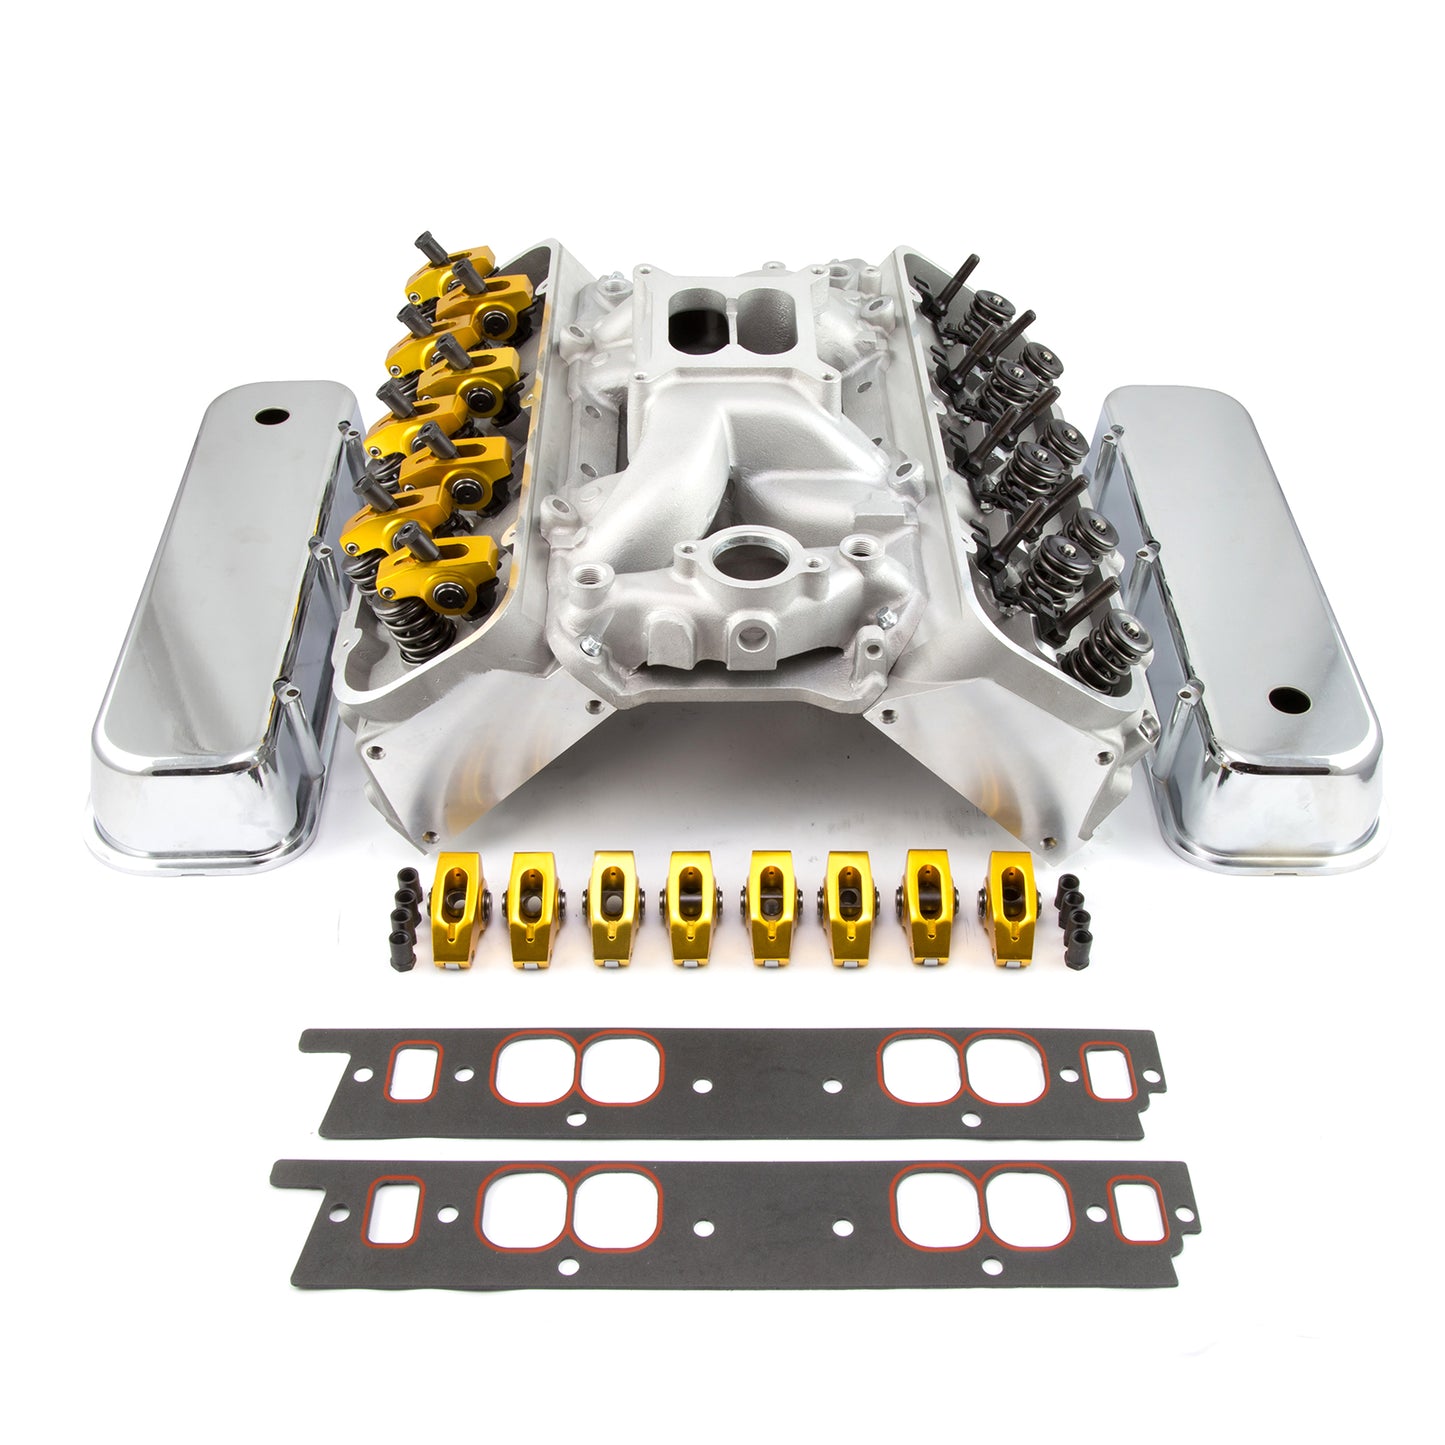 Speedmaster PCE435.1013 Fits Chevy BBC 396 Hyd FT Cylinder Head Top End Engine Combo Kit